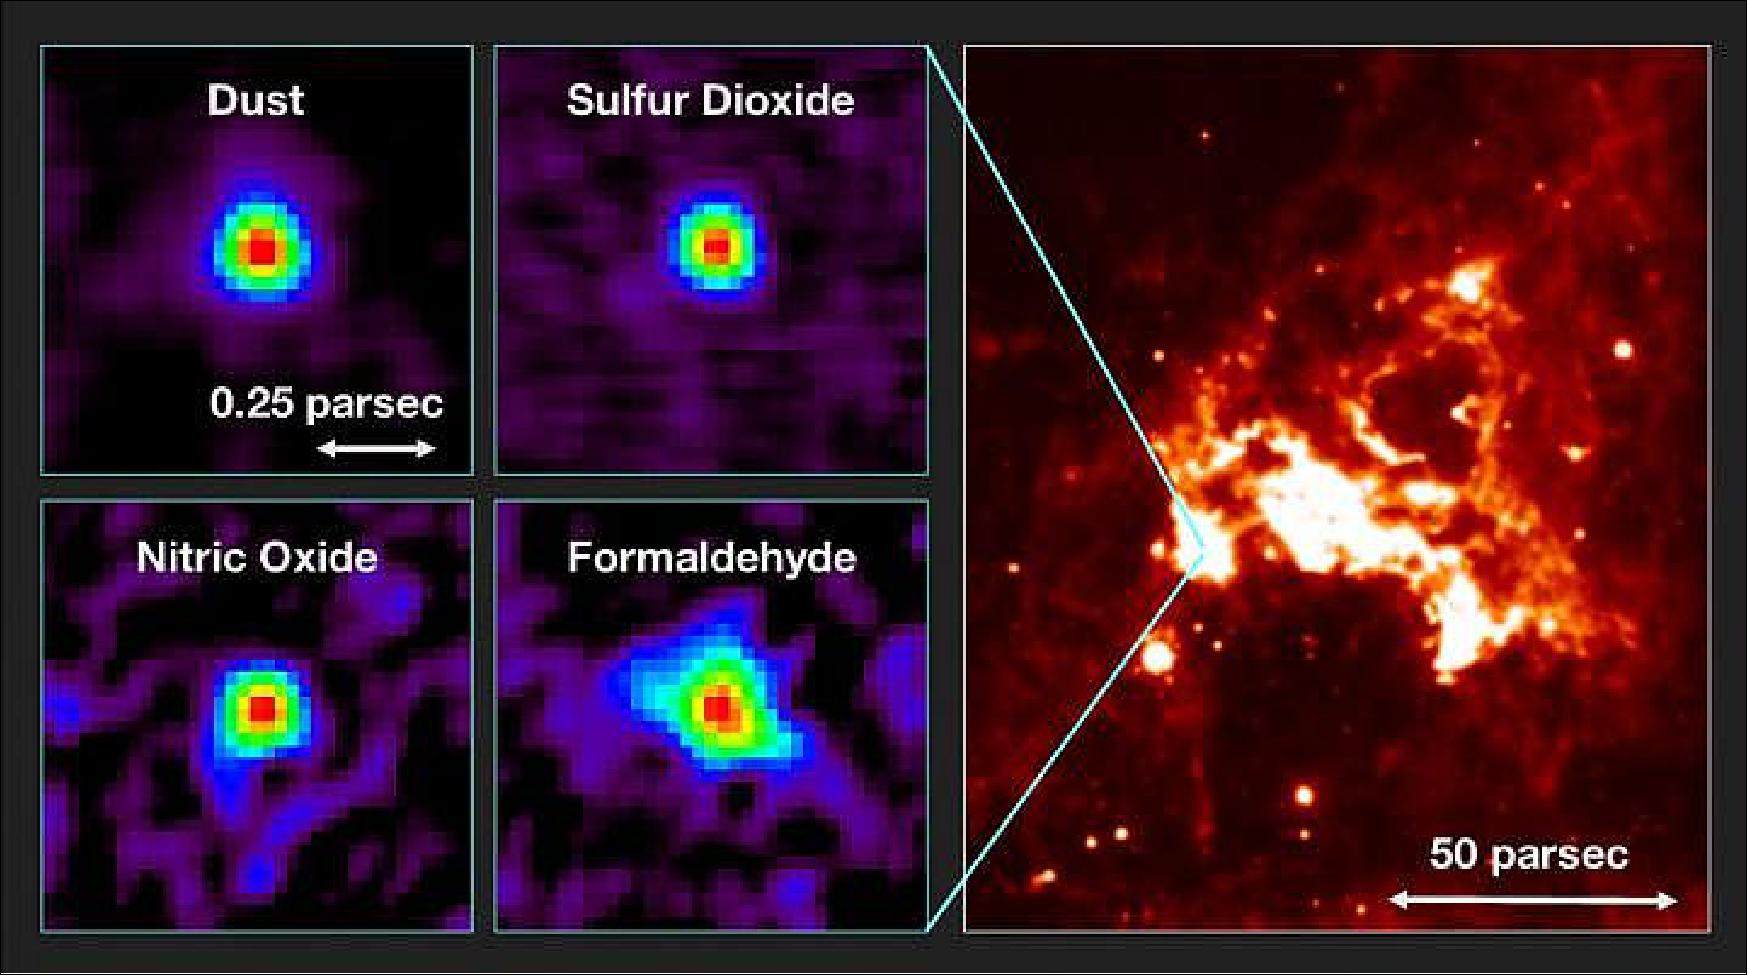 Figure 47: Left: Distributions of molecular line emission from a hot molecular core in the Large Magellanic Cloud observed with ALMA. Emissions from dust, sulfur dioxide (SO2), nitric oxide (NO), and and formaldehyde (H2CO) are shown as examples. Right: An infrared image of the surrounding star-forming region (based on the 8 µm data provided by the NASA/Spitzer Space Telescope), image credit: T. Shimonishi/Tohoku University, ALMA (ESO/NAOJ/NRAO)